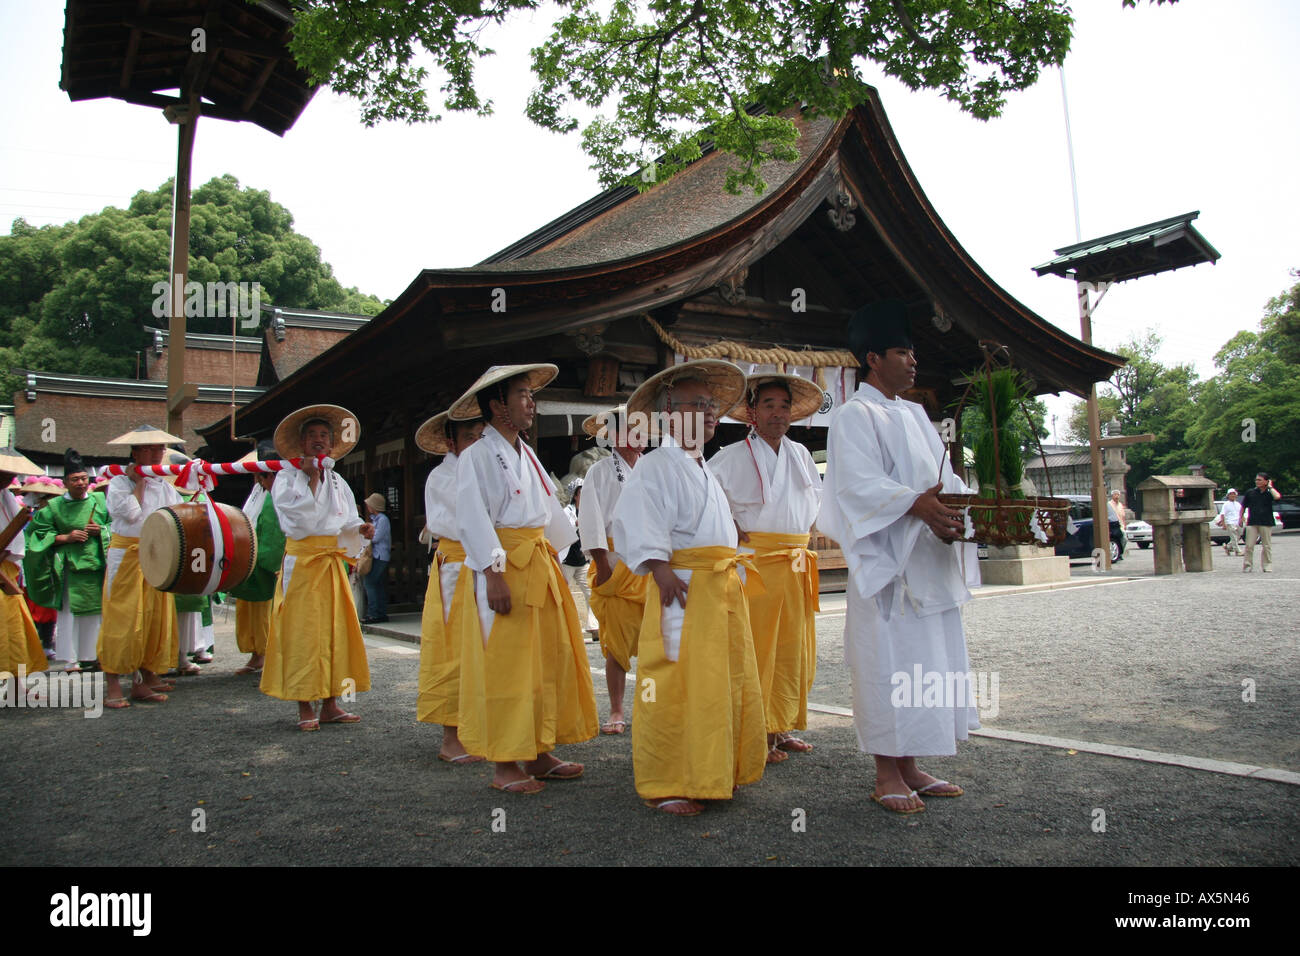 Harvest festival procession at shinto shrine in Japan Stock Photo